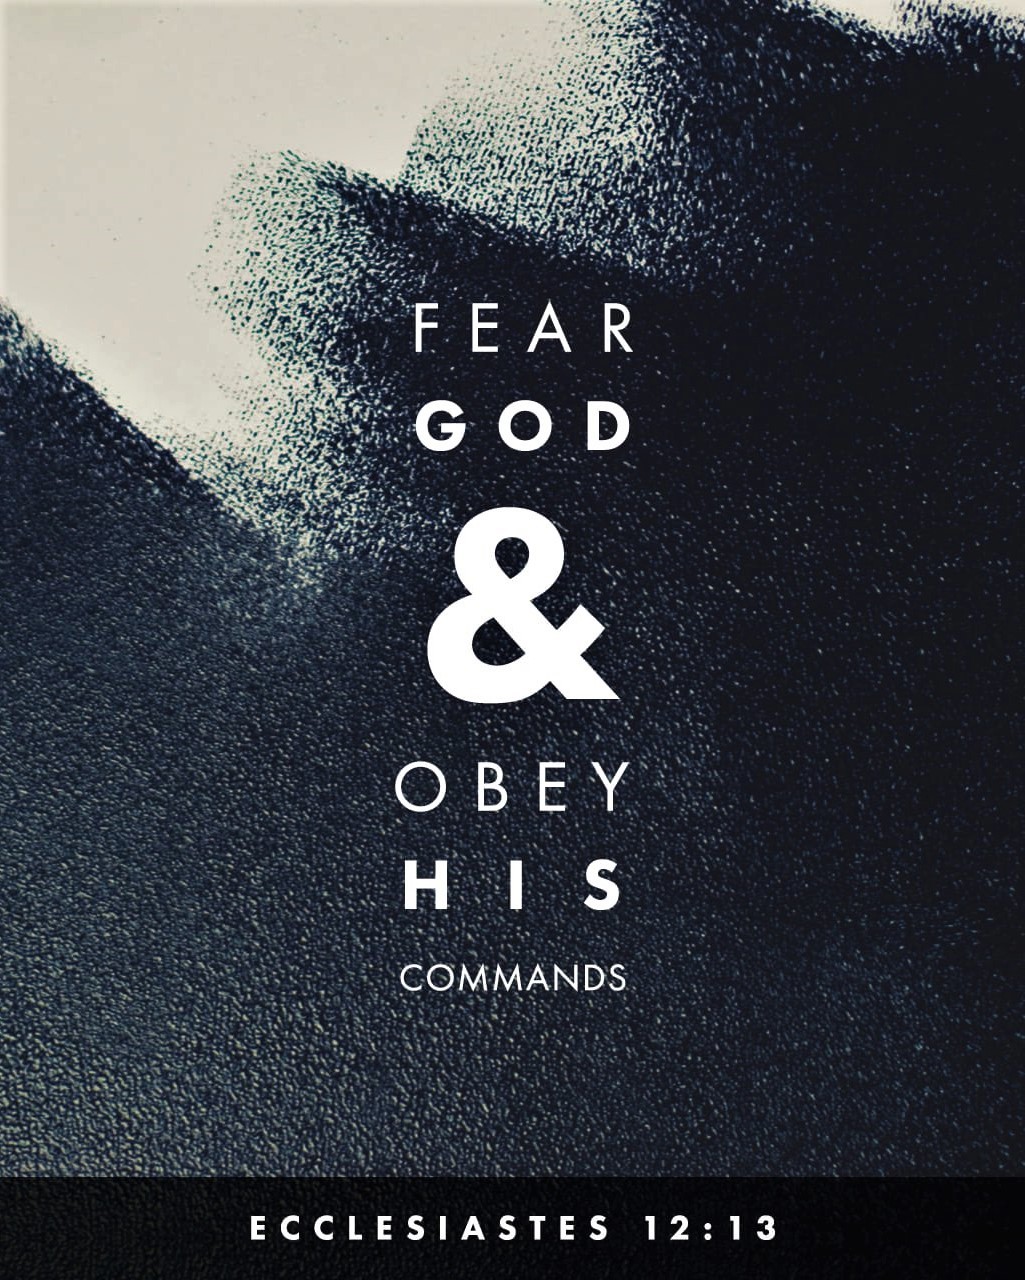 Ecclesiastes 12:13 (NLT) - That’s the whole story. Here now is my final conclusion: Fear God and obey His commands, for this is everyone’s duty.